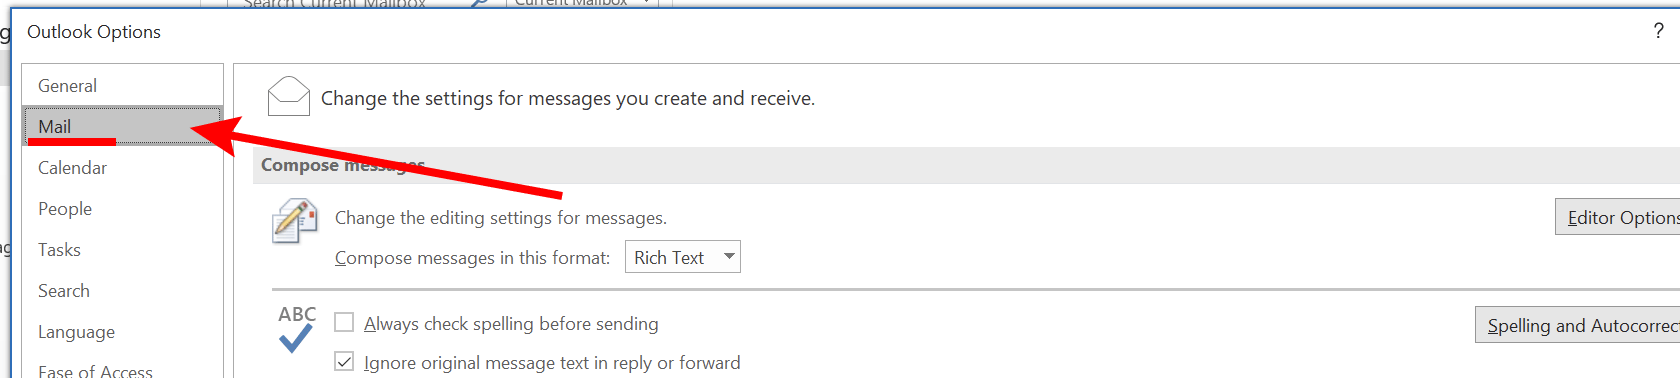 Mail tab in Outlook options